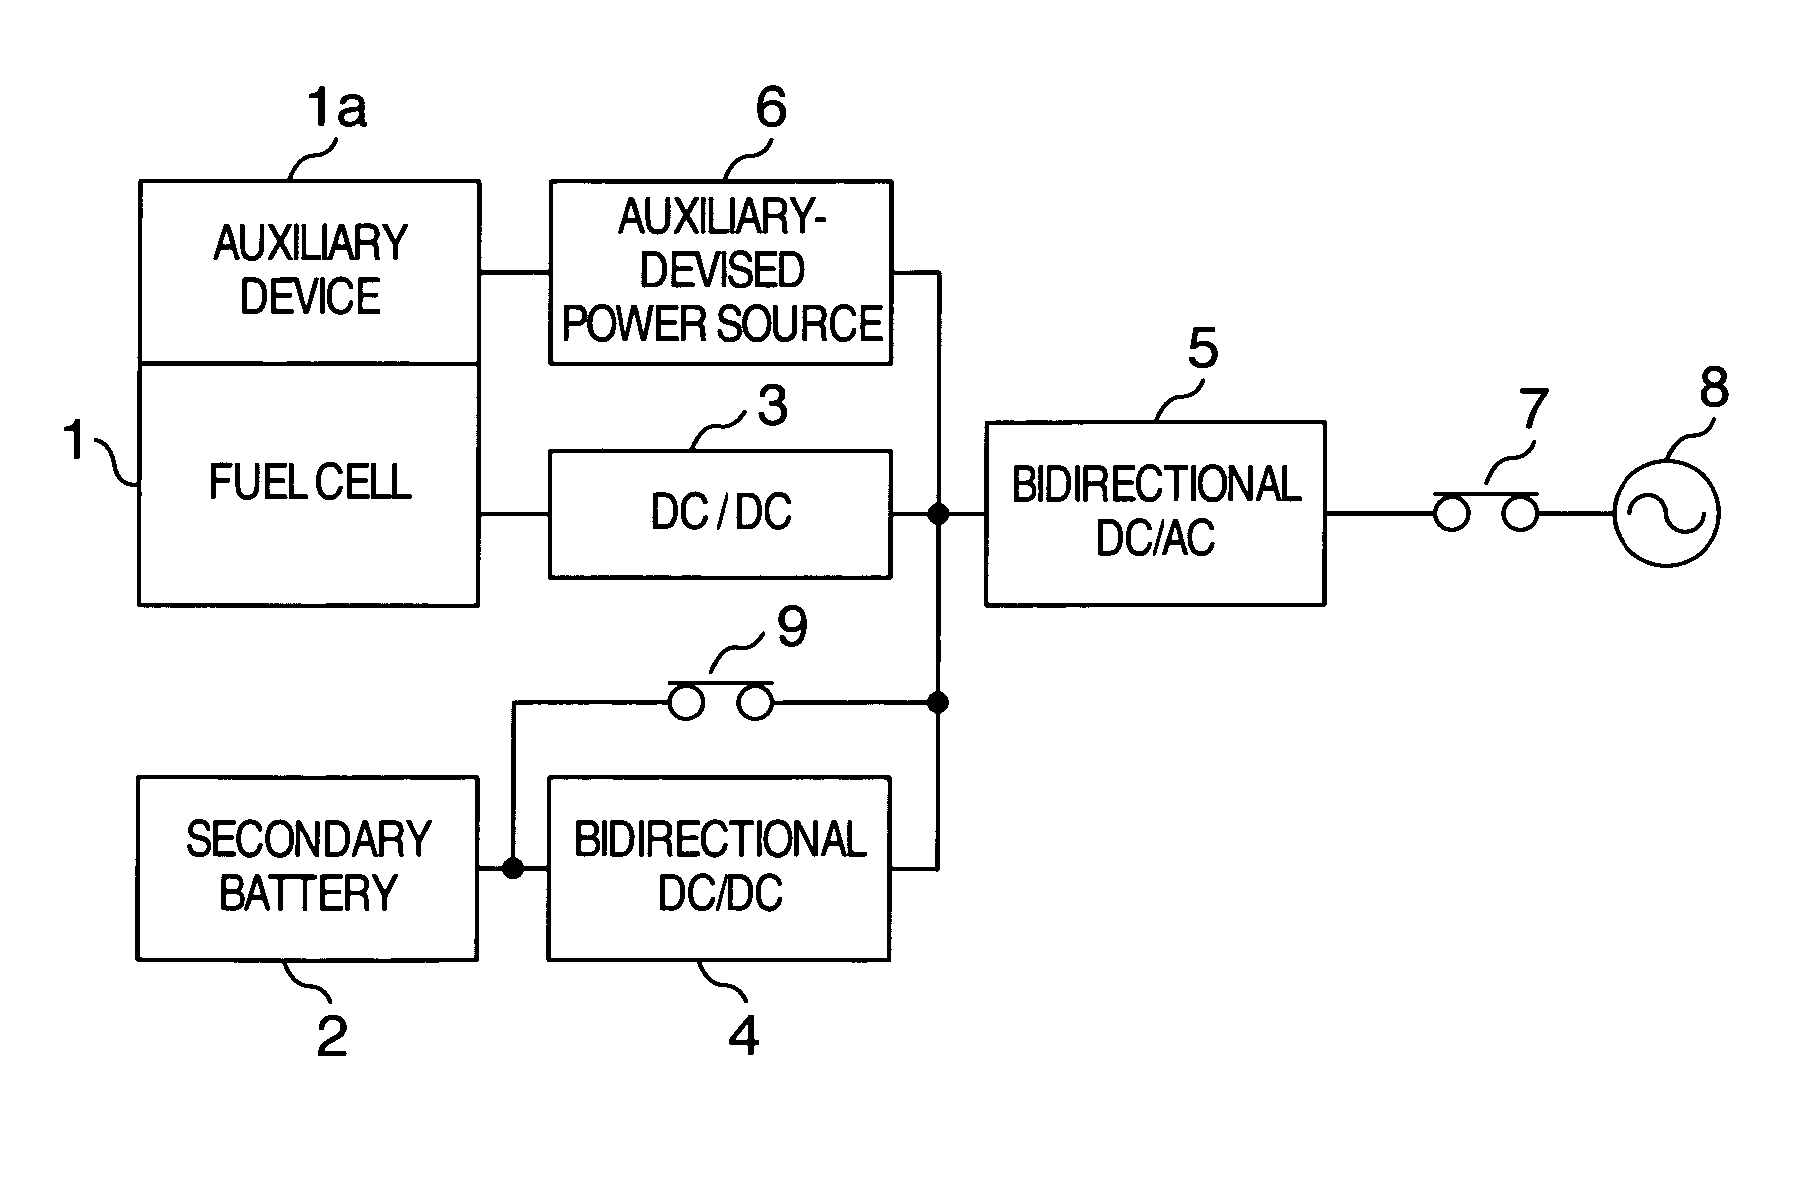 Power conversion system